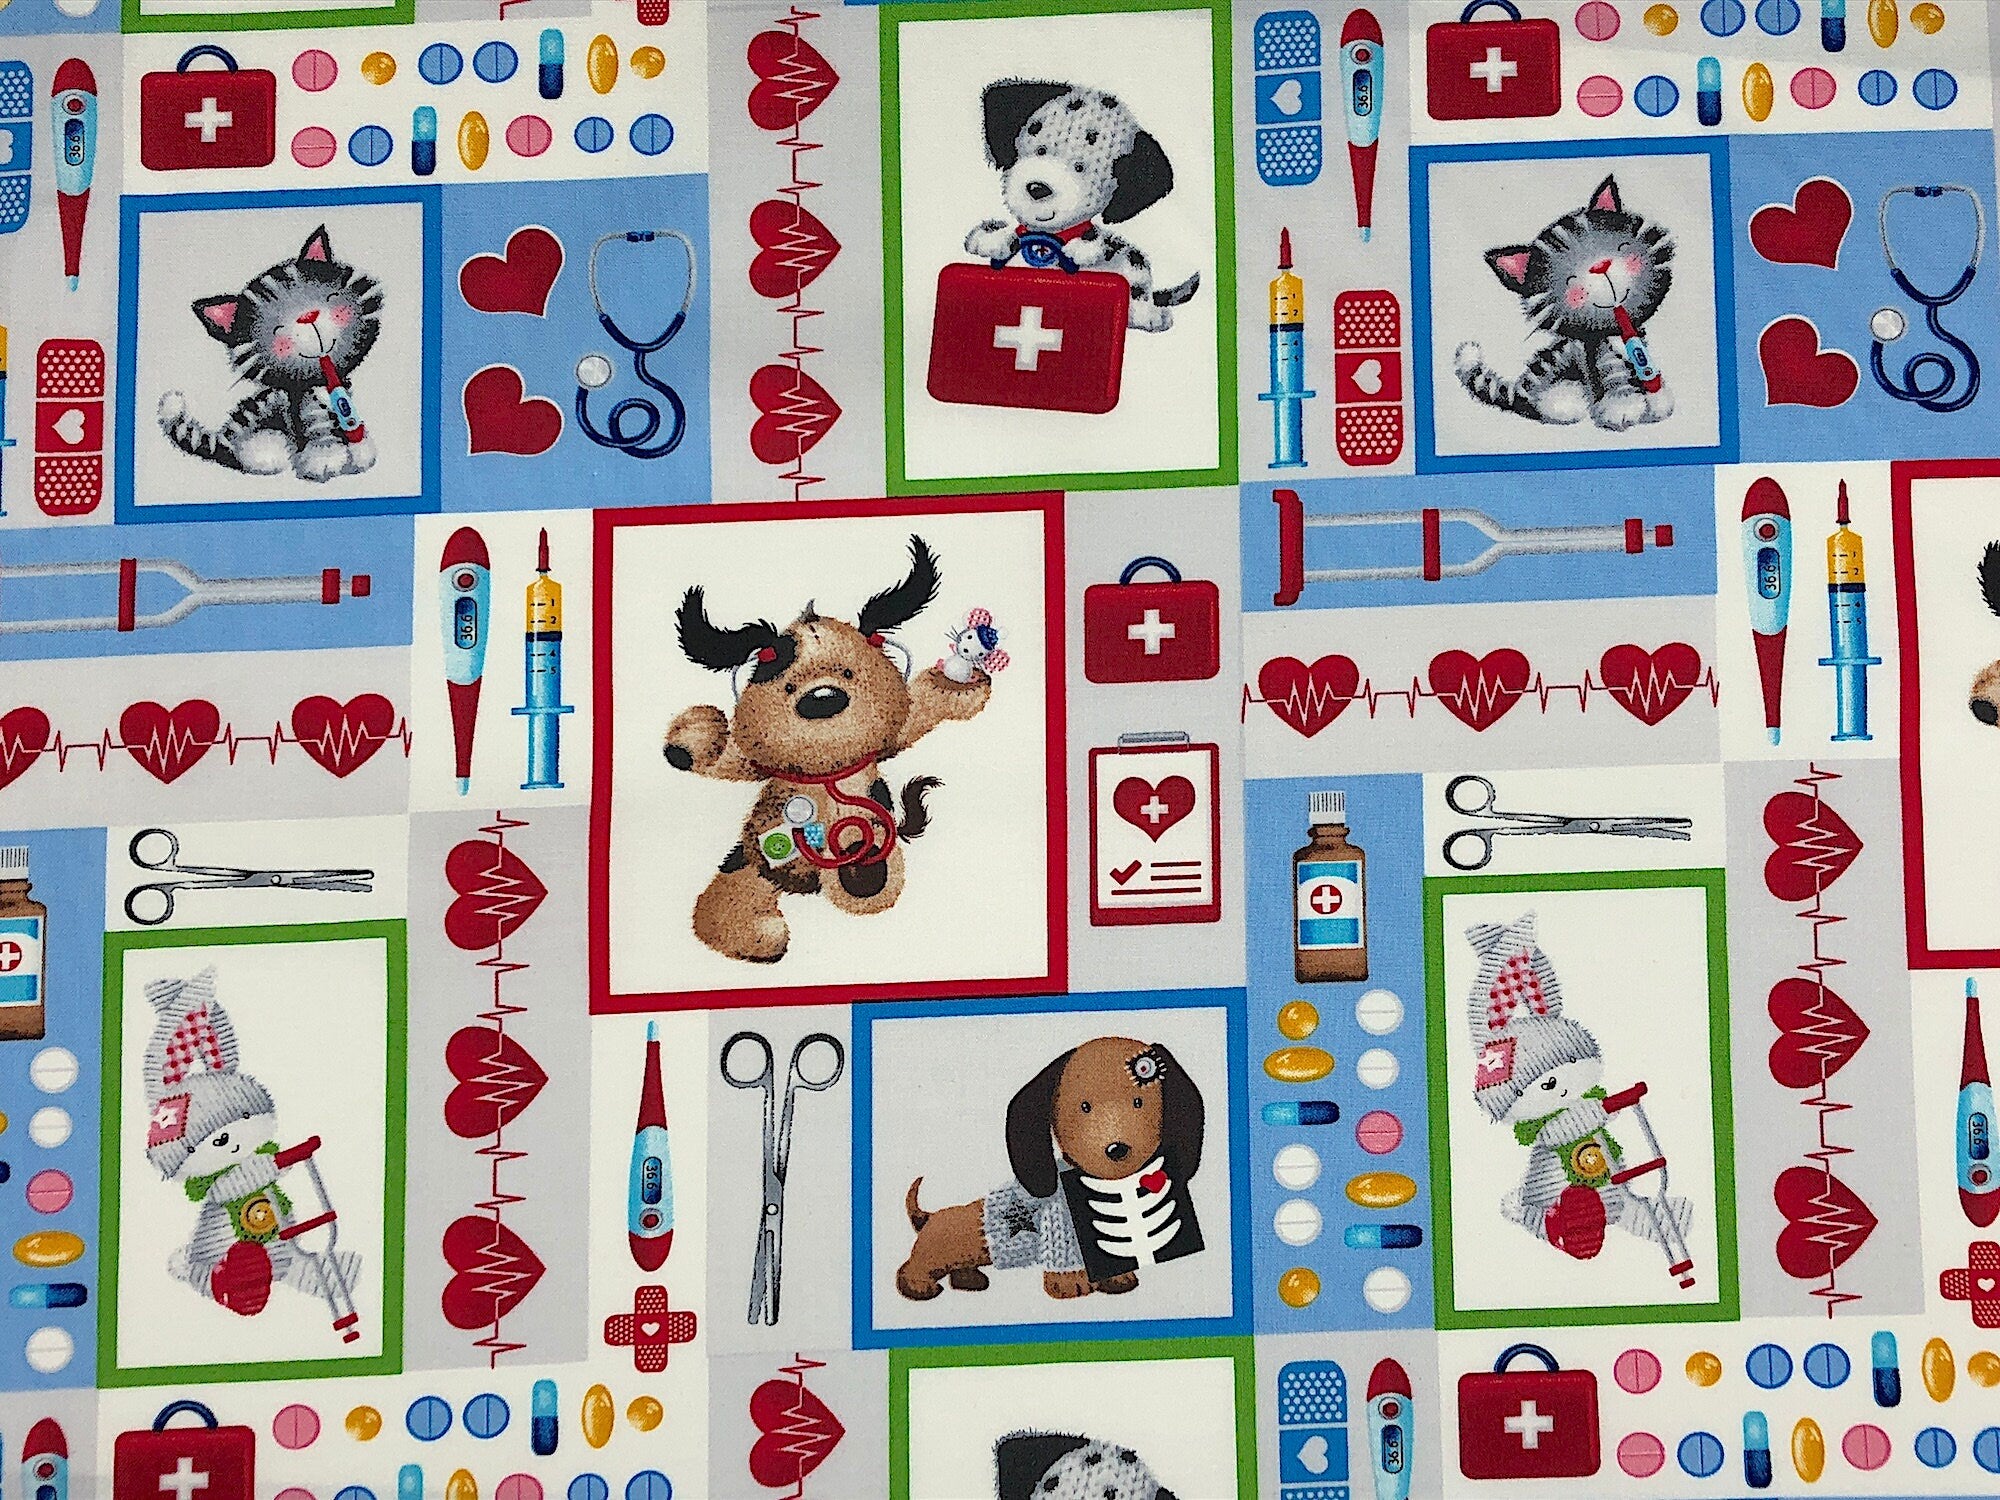 The white fabric is covered with cats and dogs, first aid kits, hearts, medicine, crutches, stethoscopes and more. Some of the dogs have stethoscopes around their neck. This fabric is part of the big hugs collection.